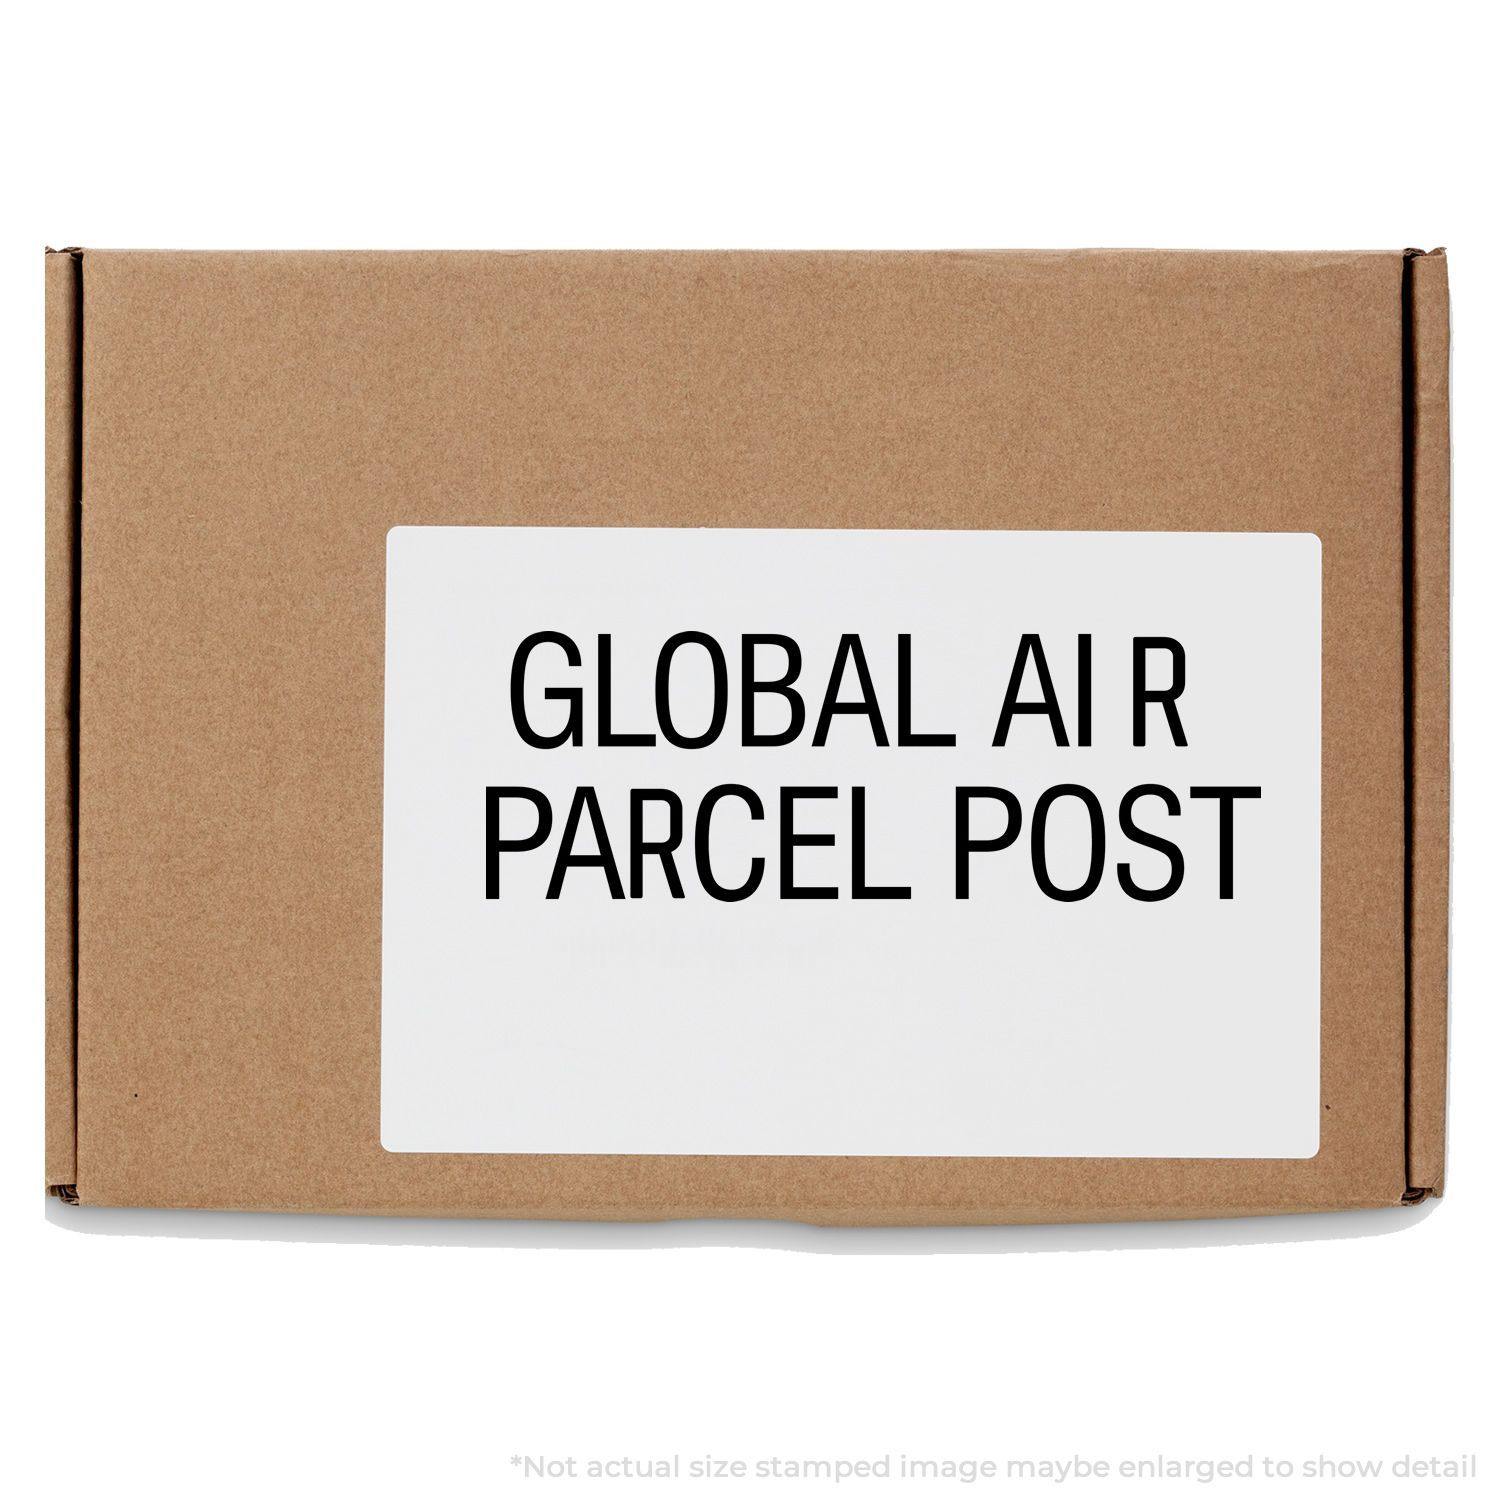 A self-inking stamp with a stamped image showing how the text "GLOBAL AIR PARCEL POST" is displayed after stamping.